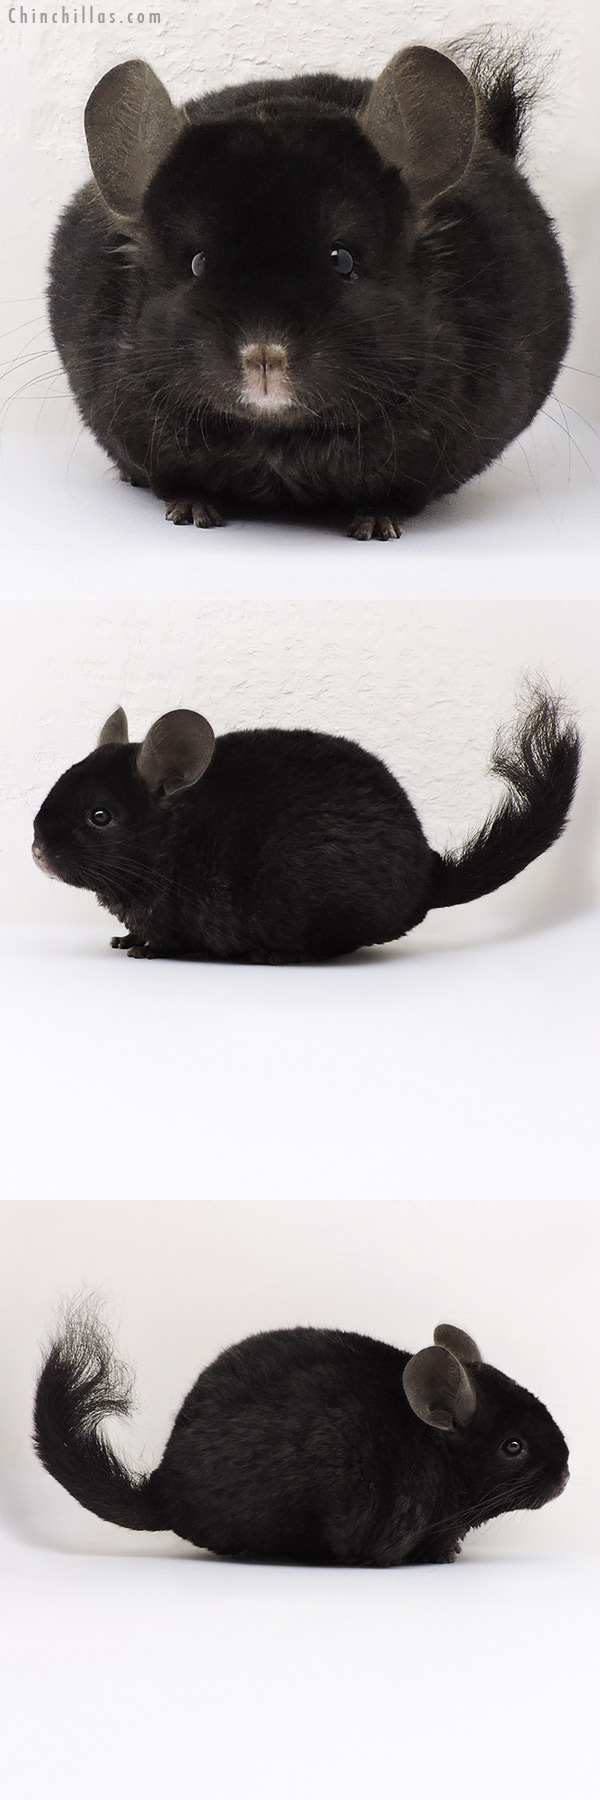 Chinchilla or related item offered for sale or export on Chinchillas.com - 17184 Exceptional Ebony Locken Female Chinchilla